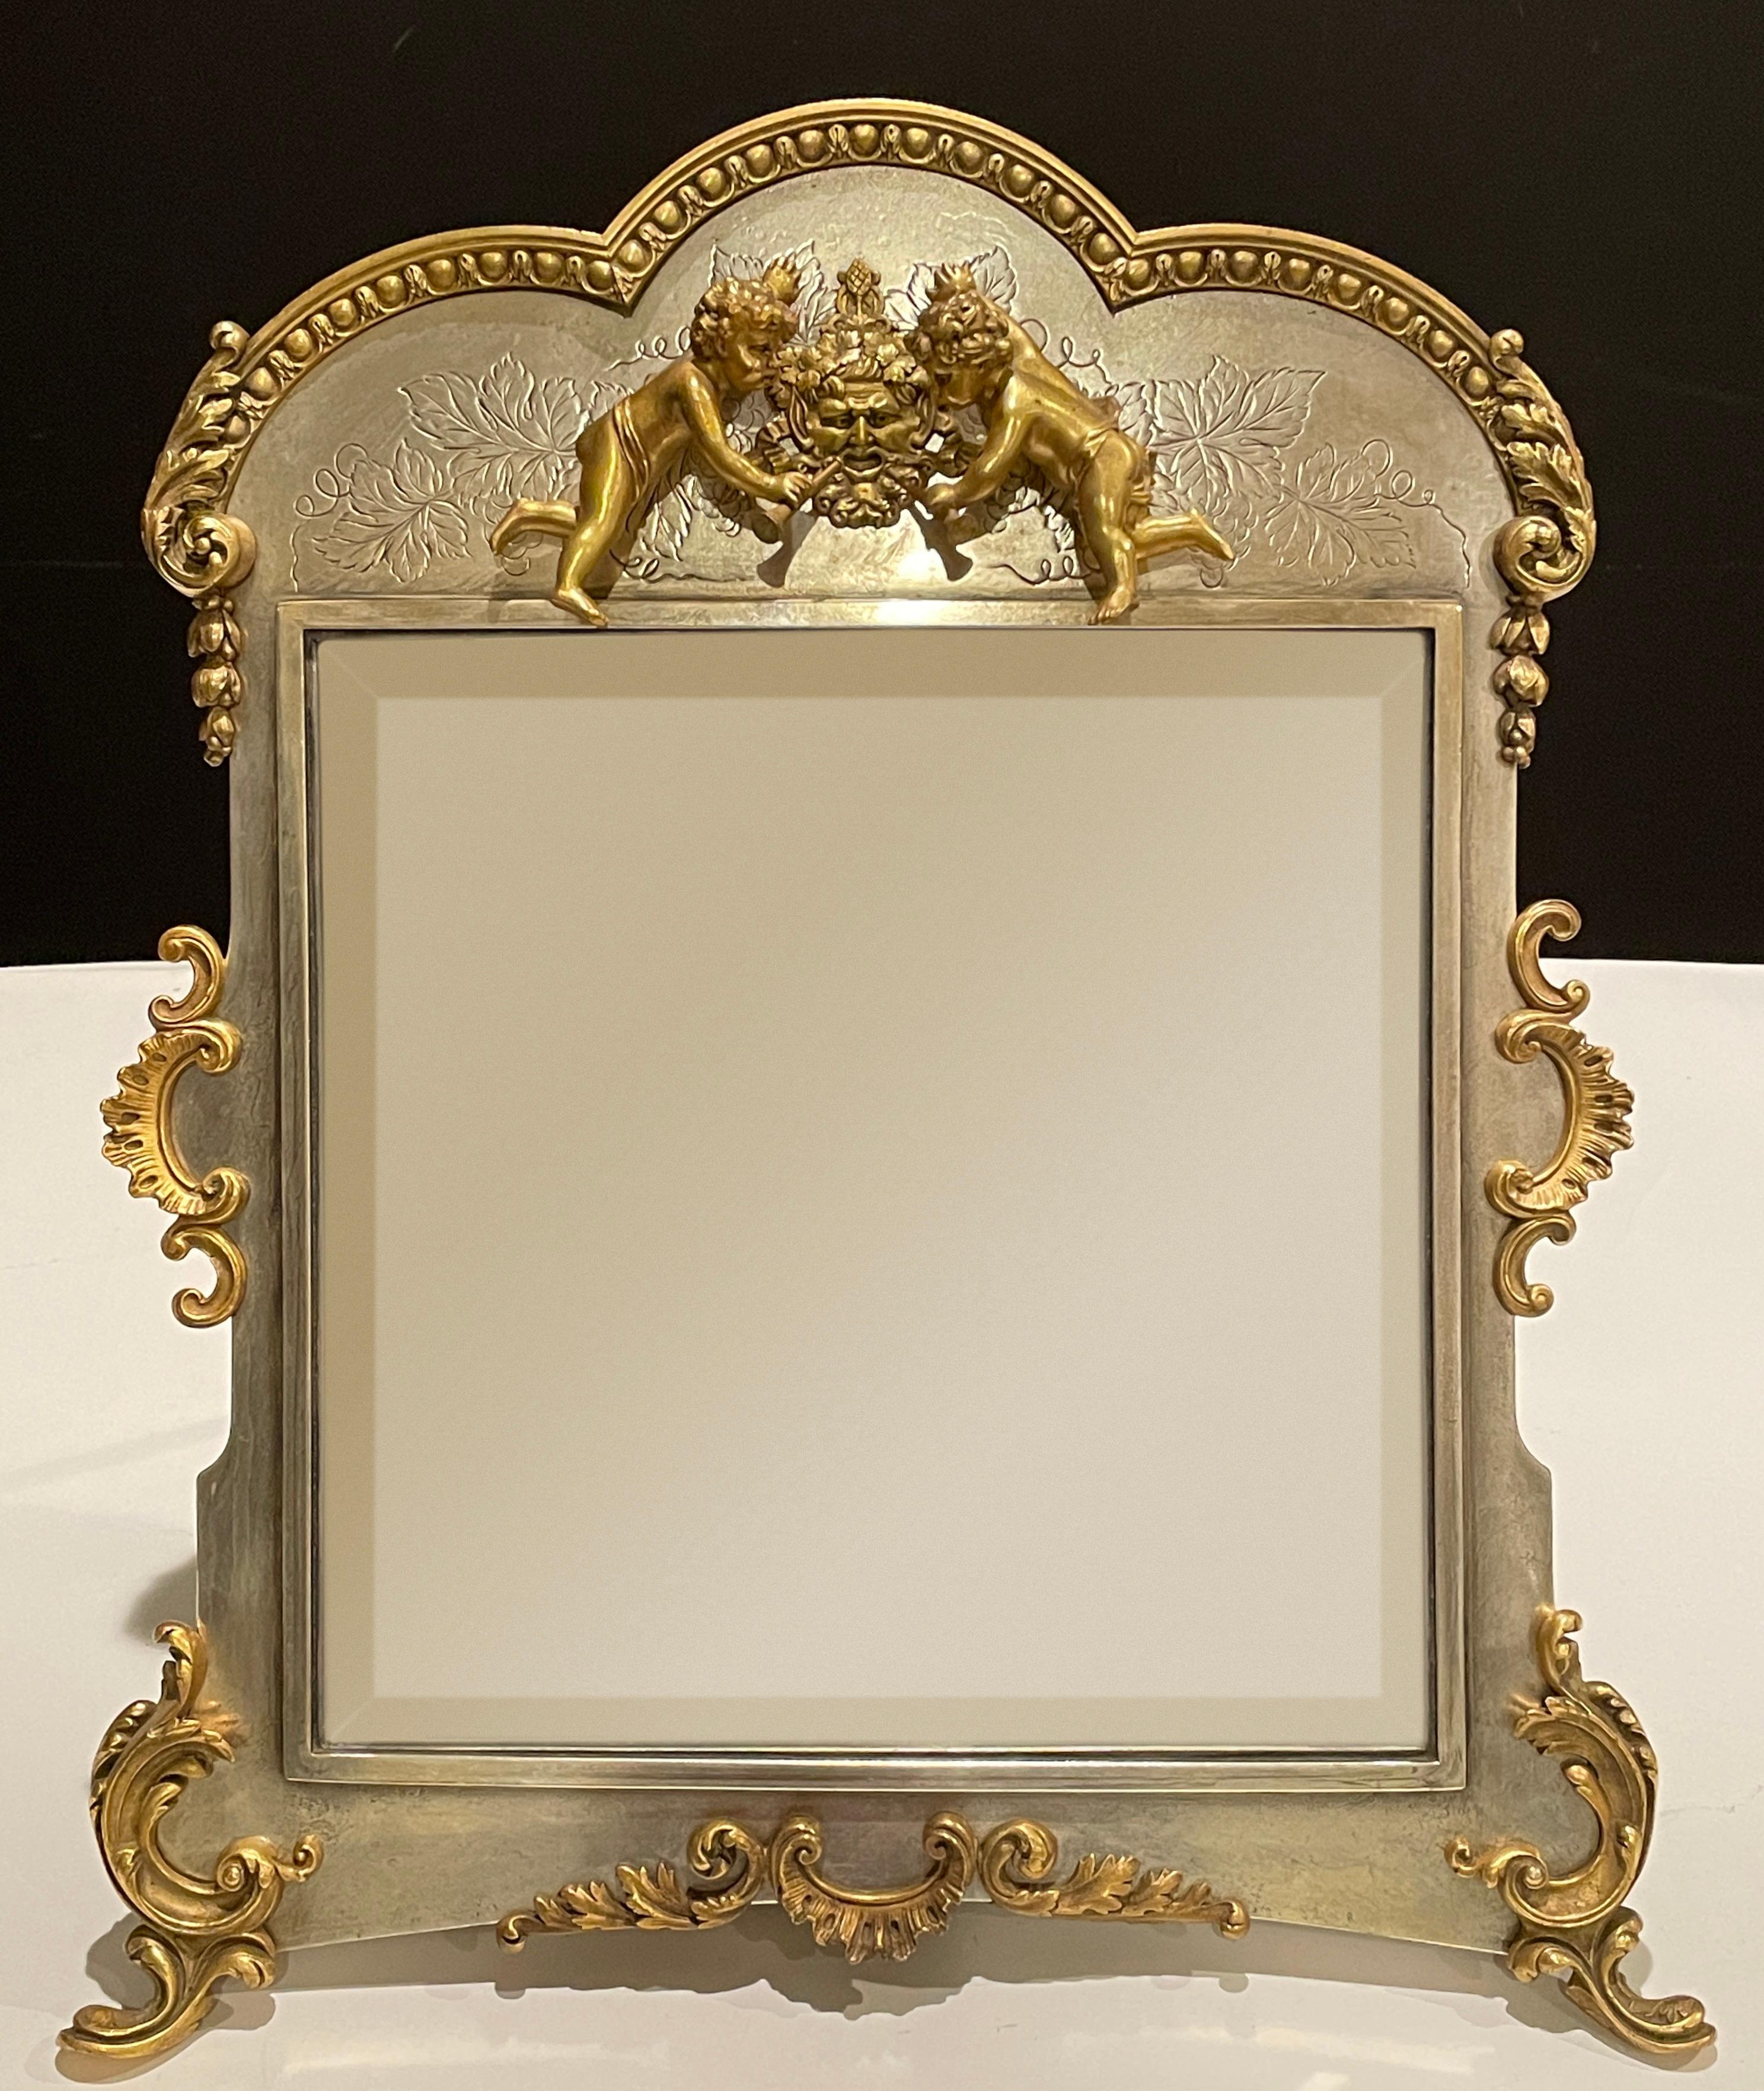 An American Silver-Plate and gilt table mirror 19th century. 
In the Rococo taste, the floral and foliate scroll decorated frame surmounted by a putto with Bacchus mask blowing trumpets raised on scroll feet, marked Derby Silver Co. Derby Conn. on